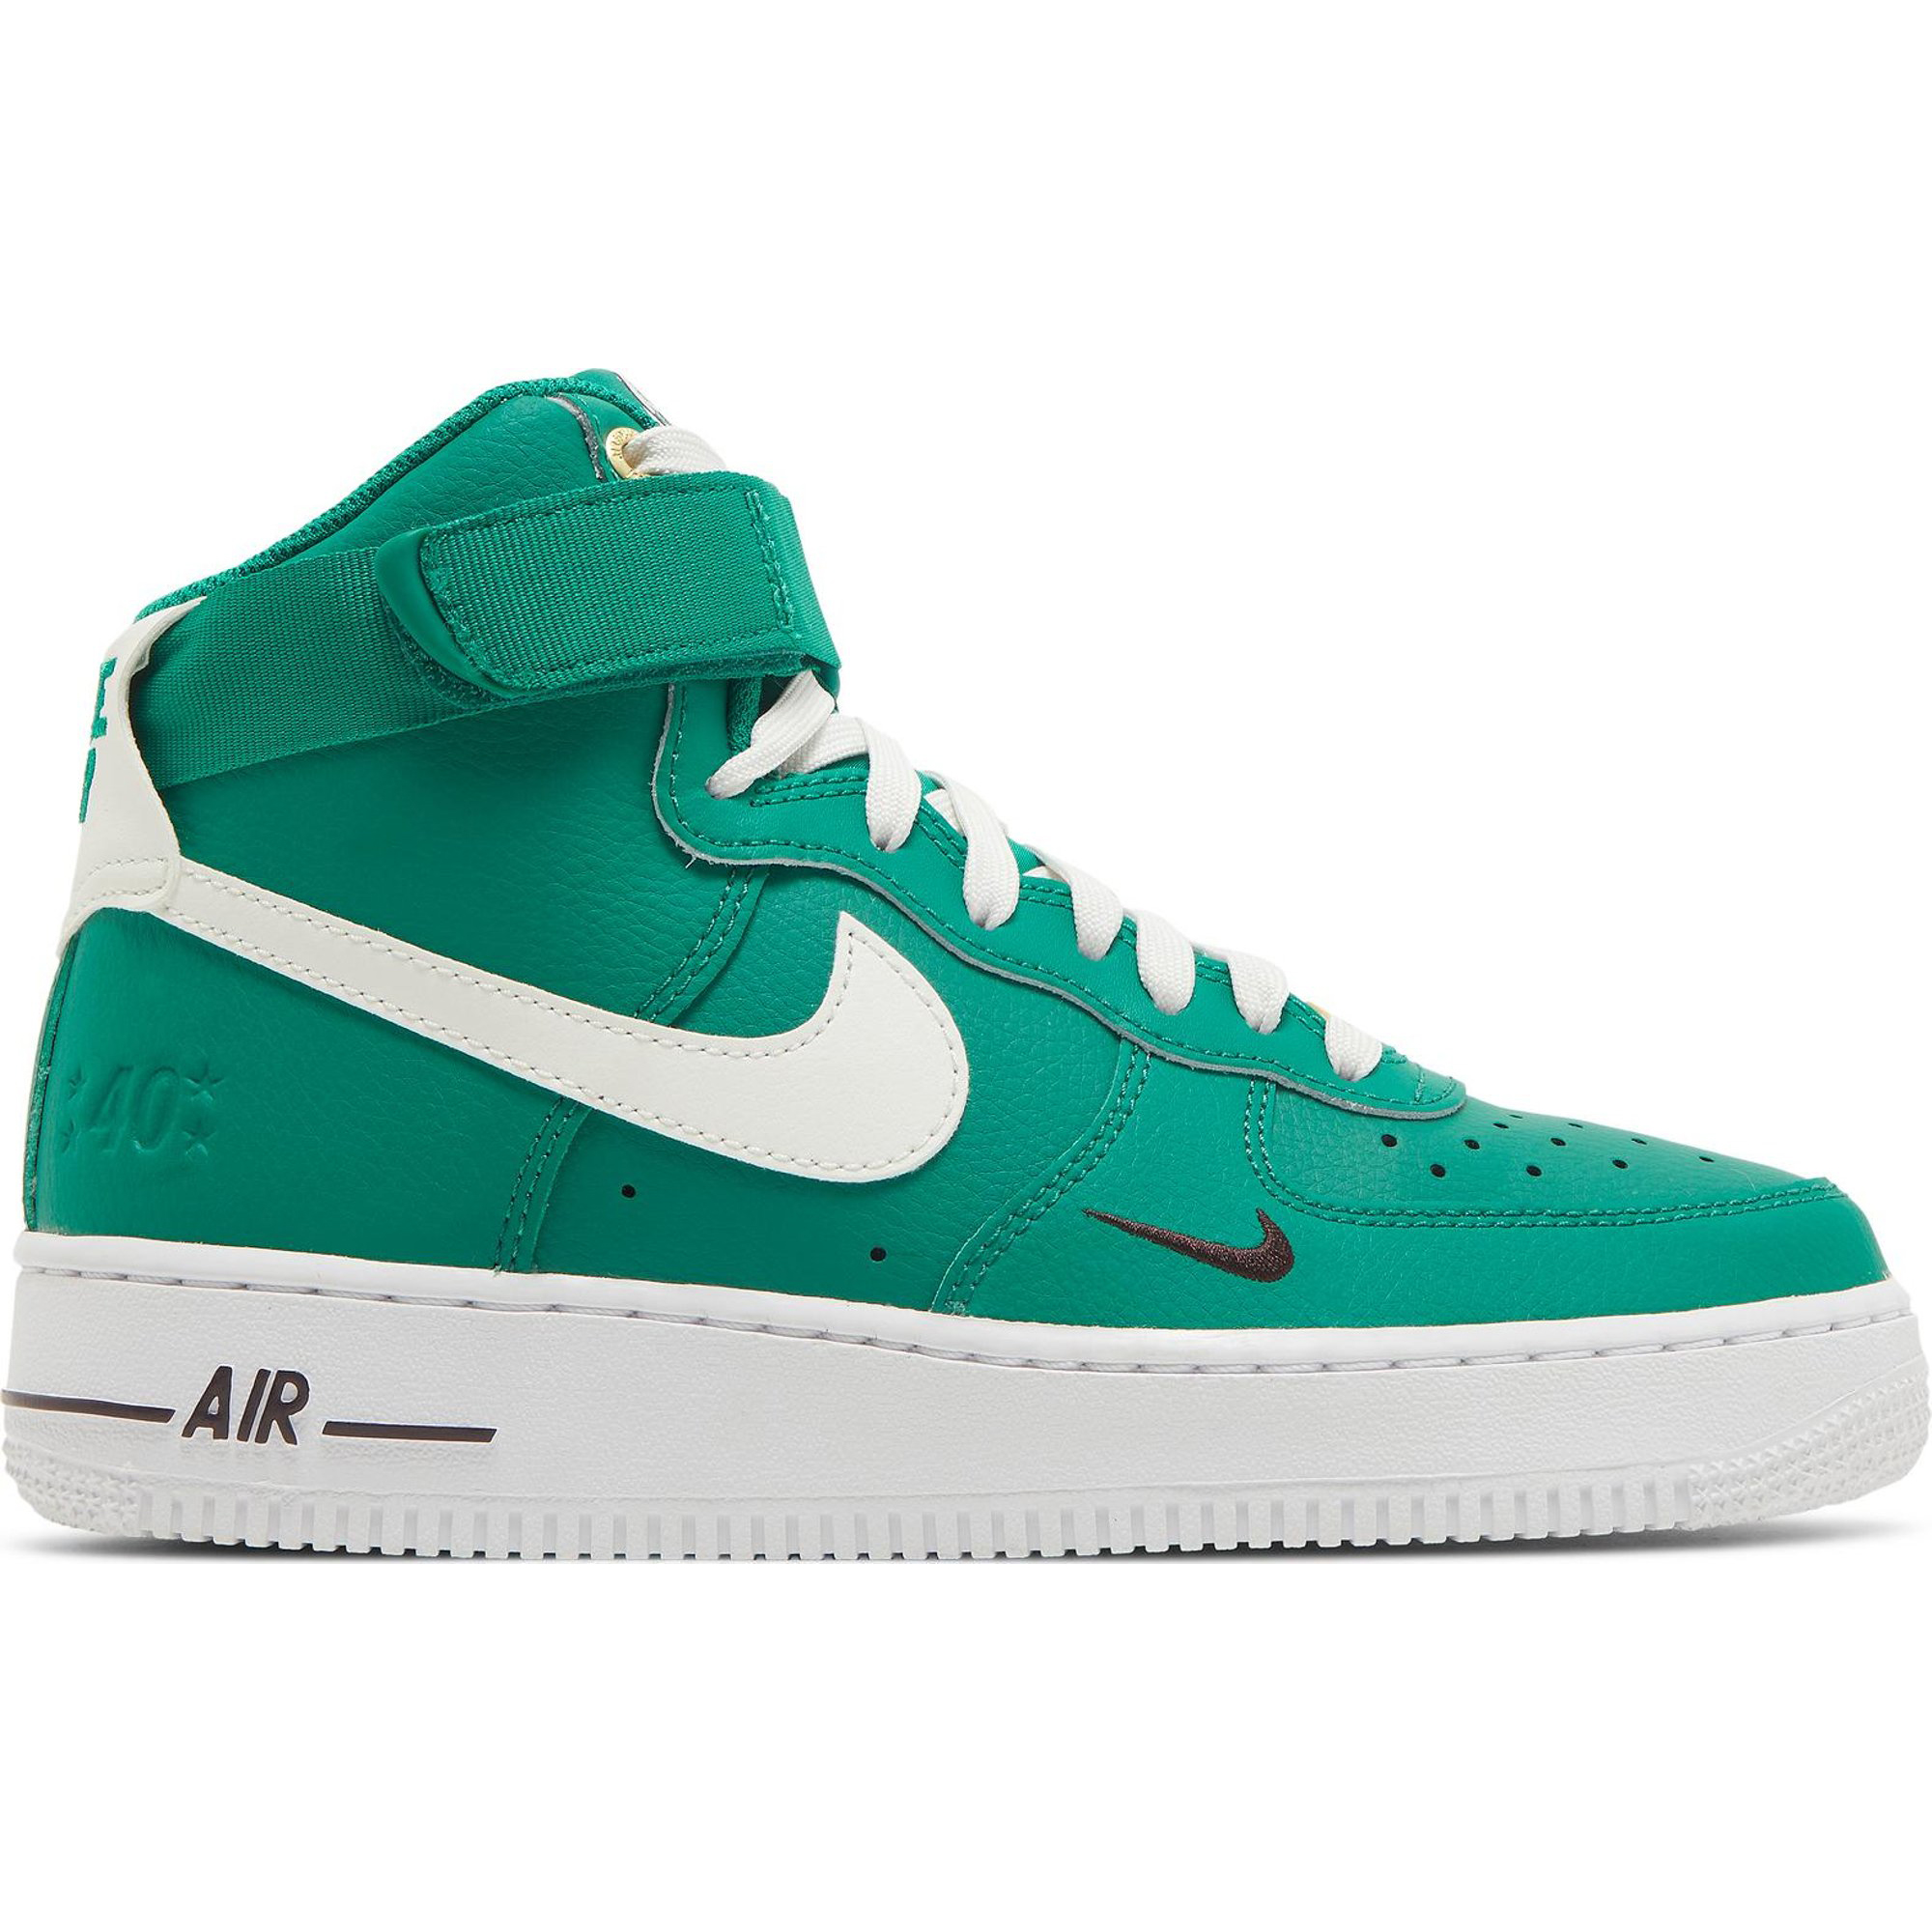 Кроссовки Nike Wmns Air Force 1 High SE, зеленый кроссовки nike wmns air force 1 low 07 se pearl white белый